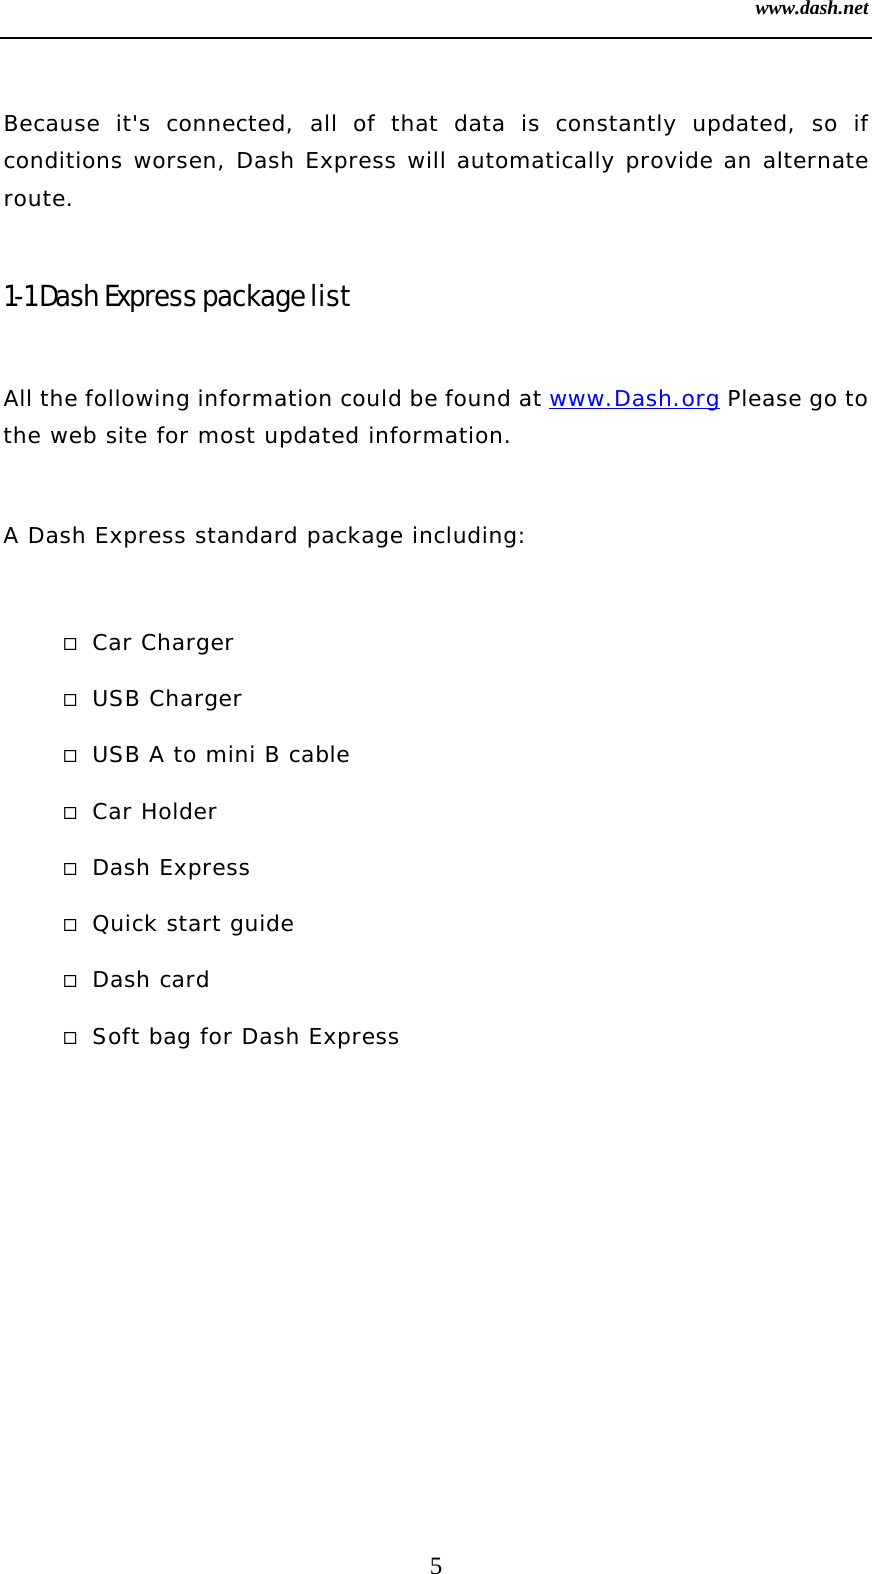 www.dash.net 5  Because it&apos;s connected, all of that data is constantly updated, so if conditions worsen, Dash Express will automatically provide an alternate route.  1-1 Dash Express package list  All the following information could be found at www.Dash.org Please go to the web site for most updated information.  A Dash Express standard package including:   Car Charger  USB Charger  USB A to mini B cable  Car Holder  Dash Express  Quick start guide  Dash card  Soft bag for Dash Express  